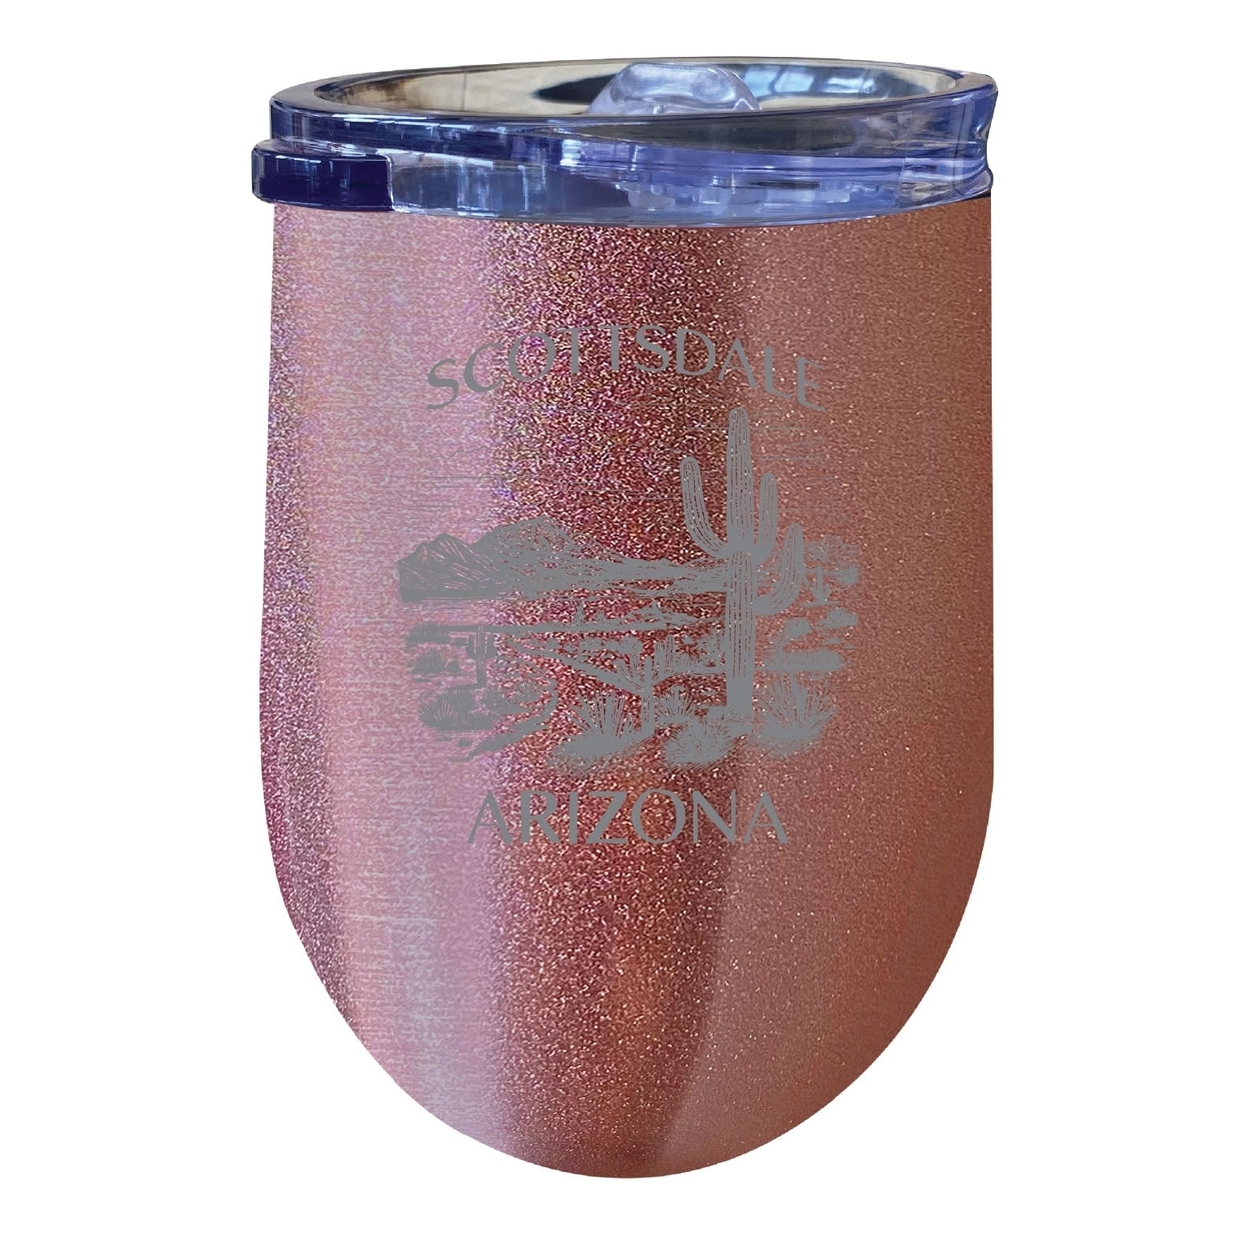 Scottsdale Arizona Souvenir 12 Oz Engraved Insulated Wine Stainless Steel Tumbler - Rose Gold,,2-Pack